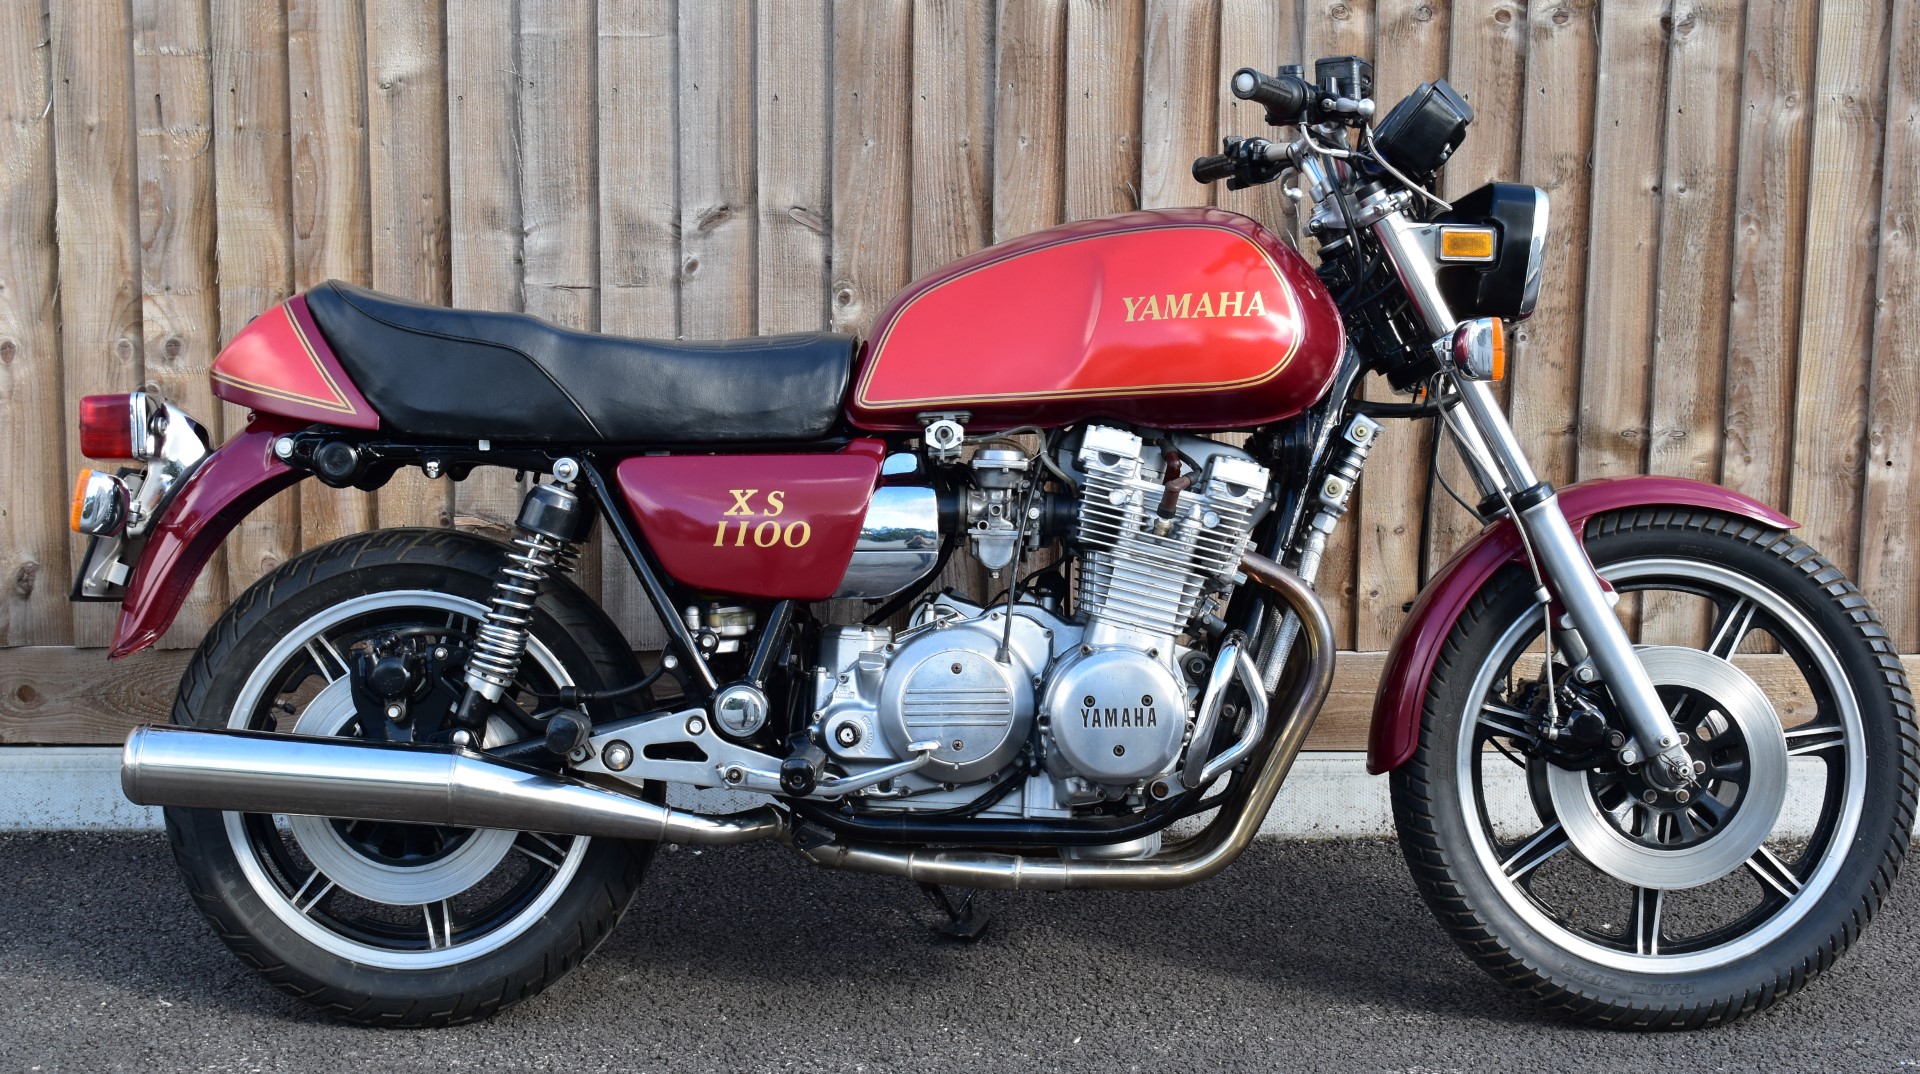 1980 Yamaha XS1100 motorbike registration NGS 439V, with V5c, used by the vendor for continental